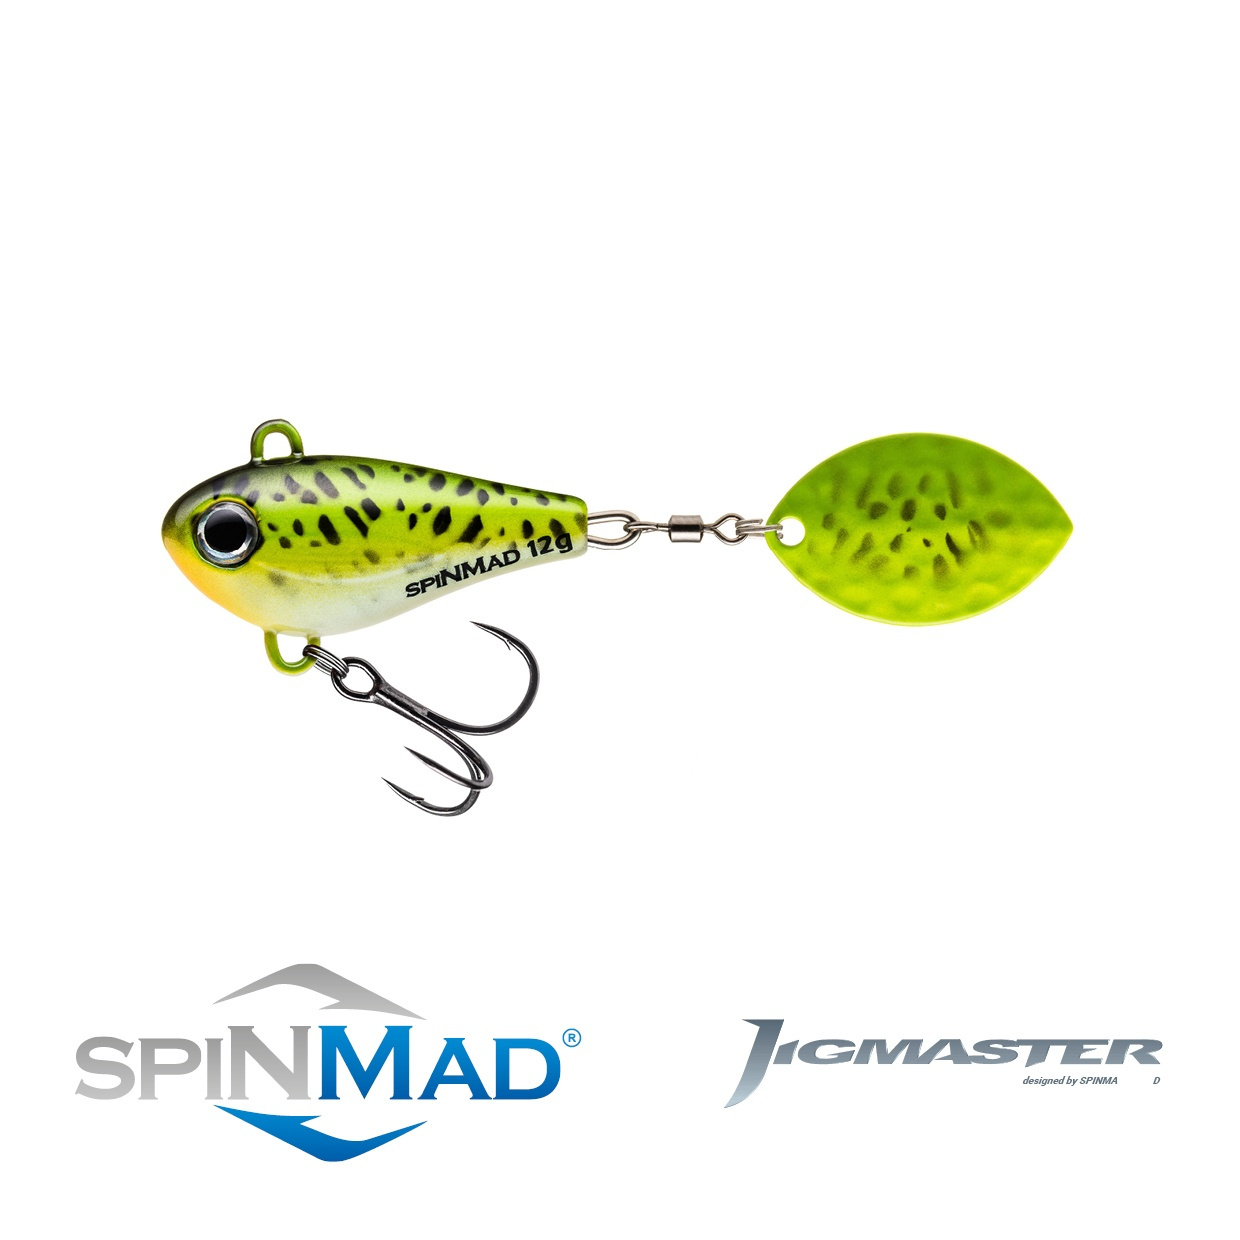 Spinmad Jigmaster 12g - 1409